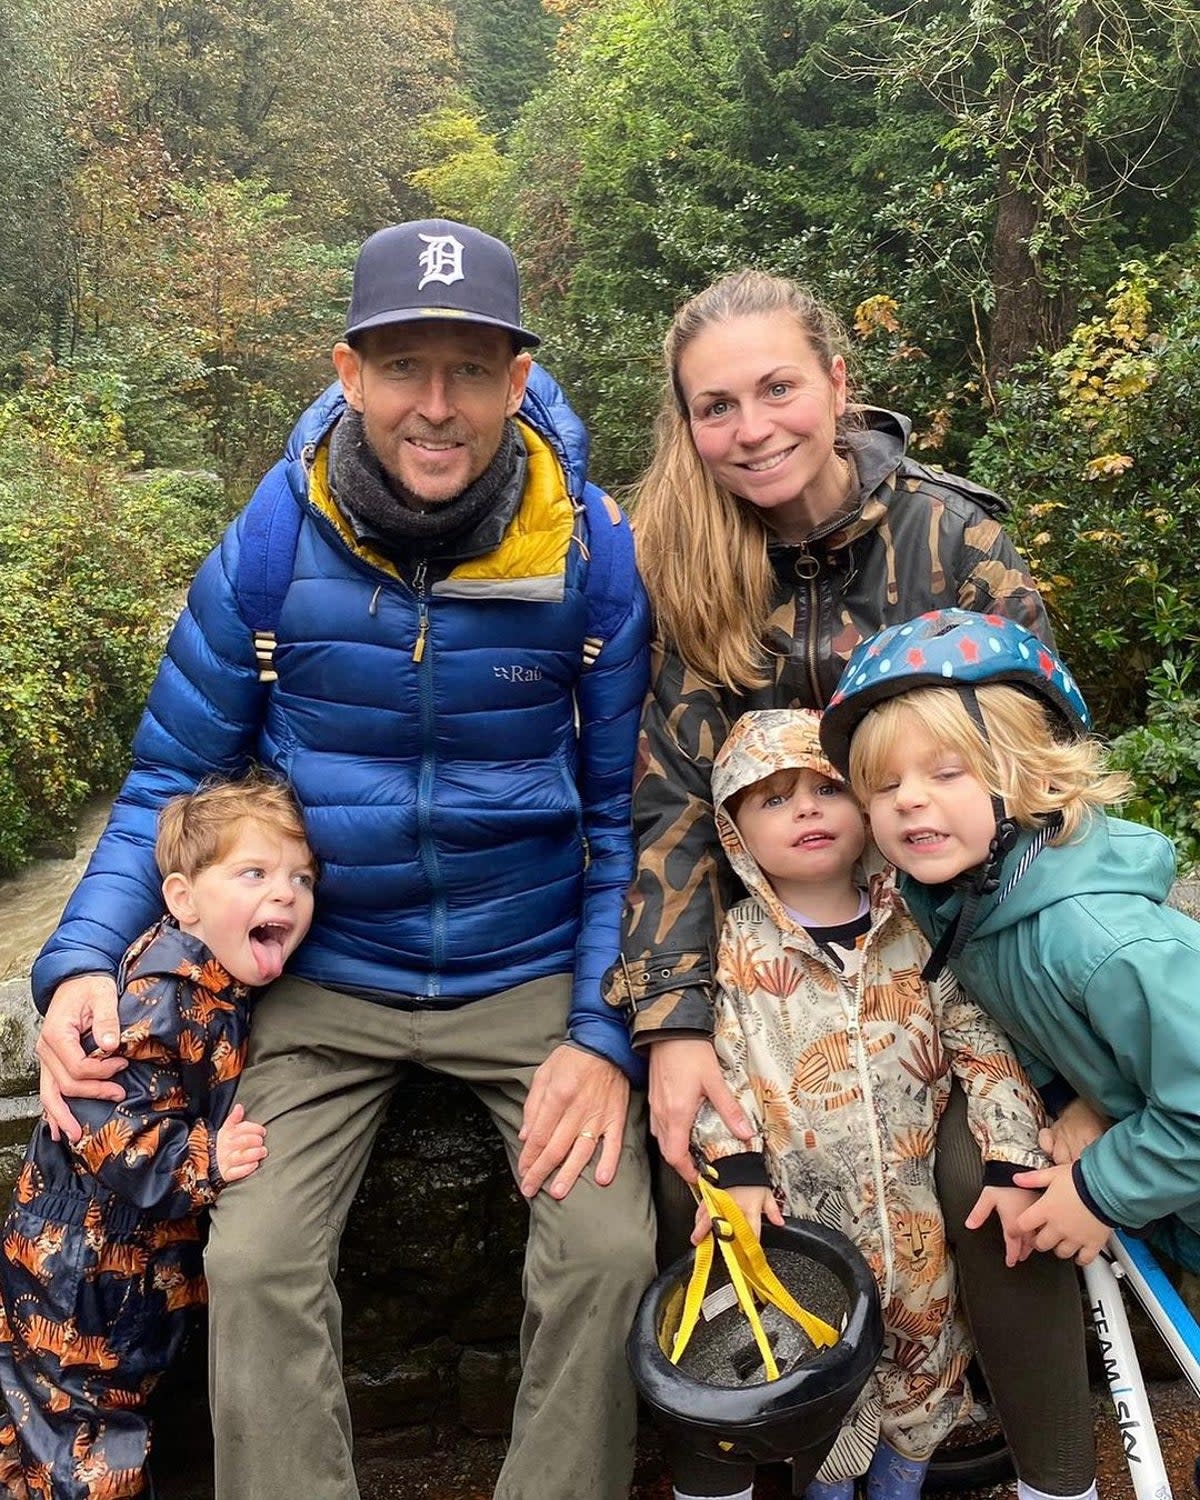 Jonnie Irwin has shared that he has been busy making new memories with his family amid cancer battle (Instagram)